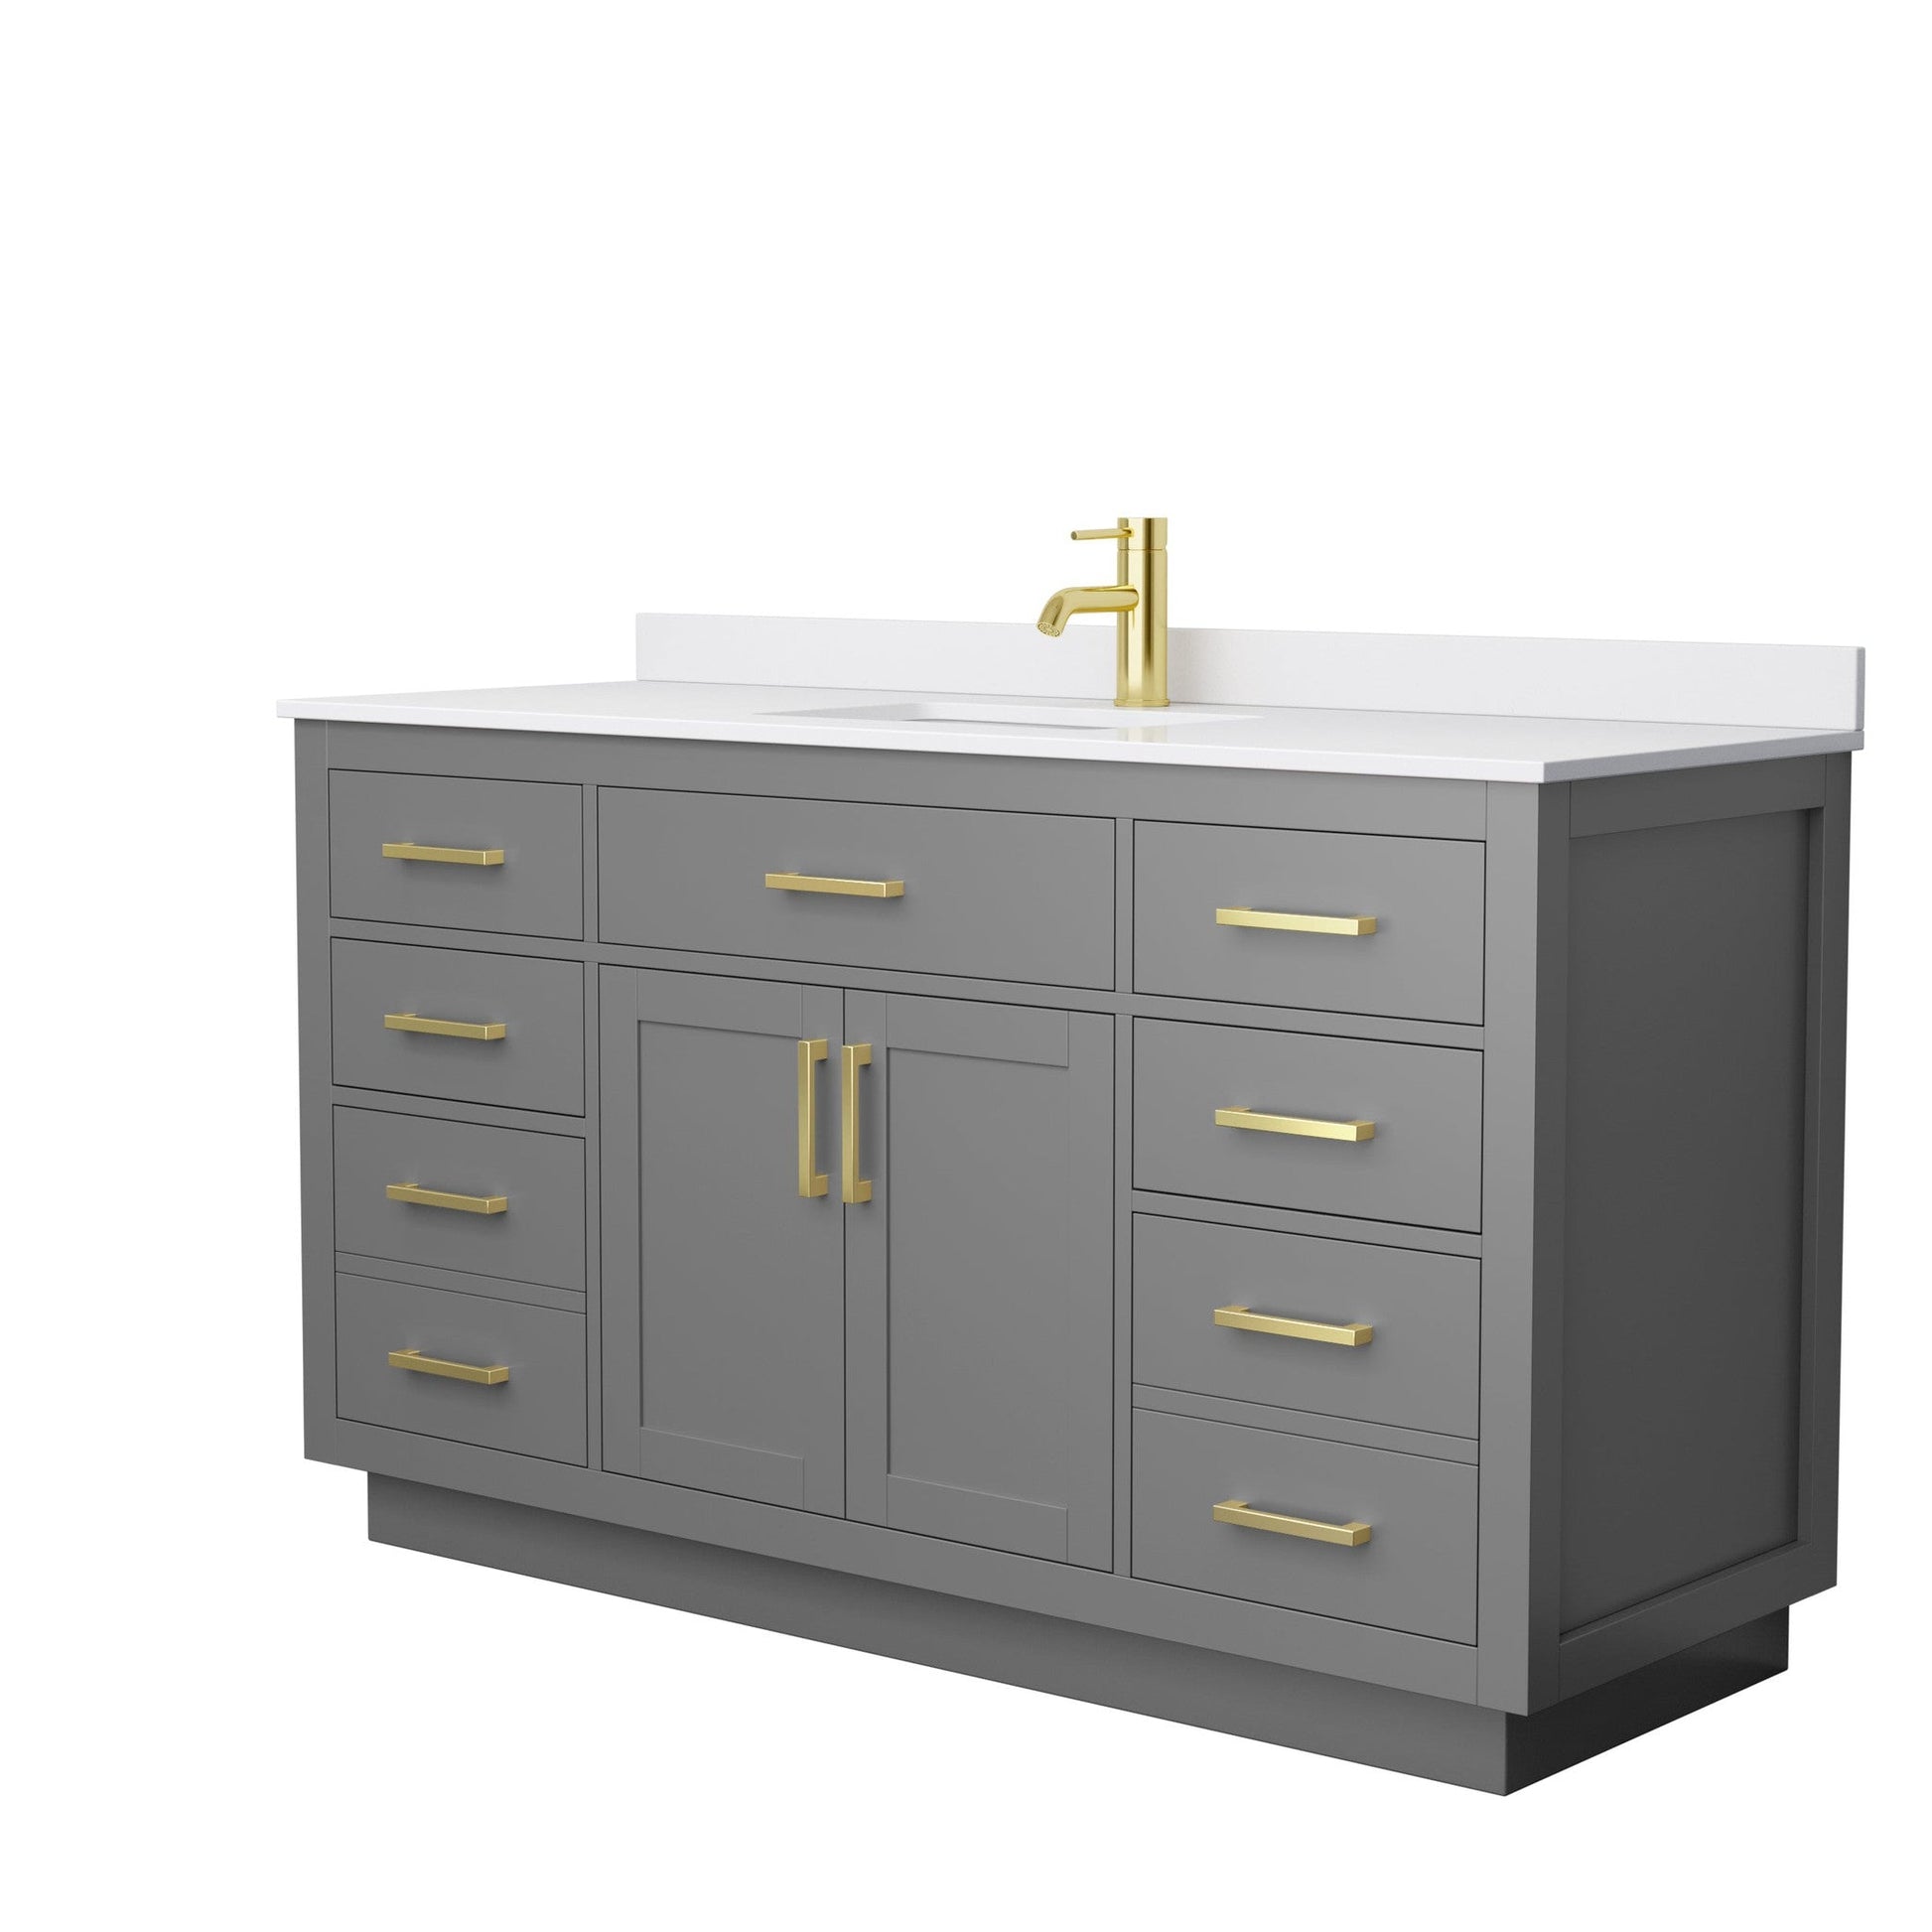 Beckett 60" Single Bathroom Vanity With Toe Kick in Dark Gray, White Cultured Marble Countertop, Undermount Square Sink, Brushed Gold Trim